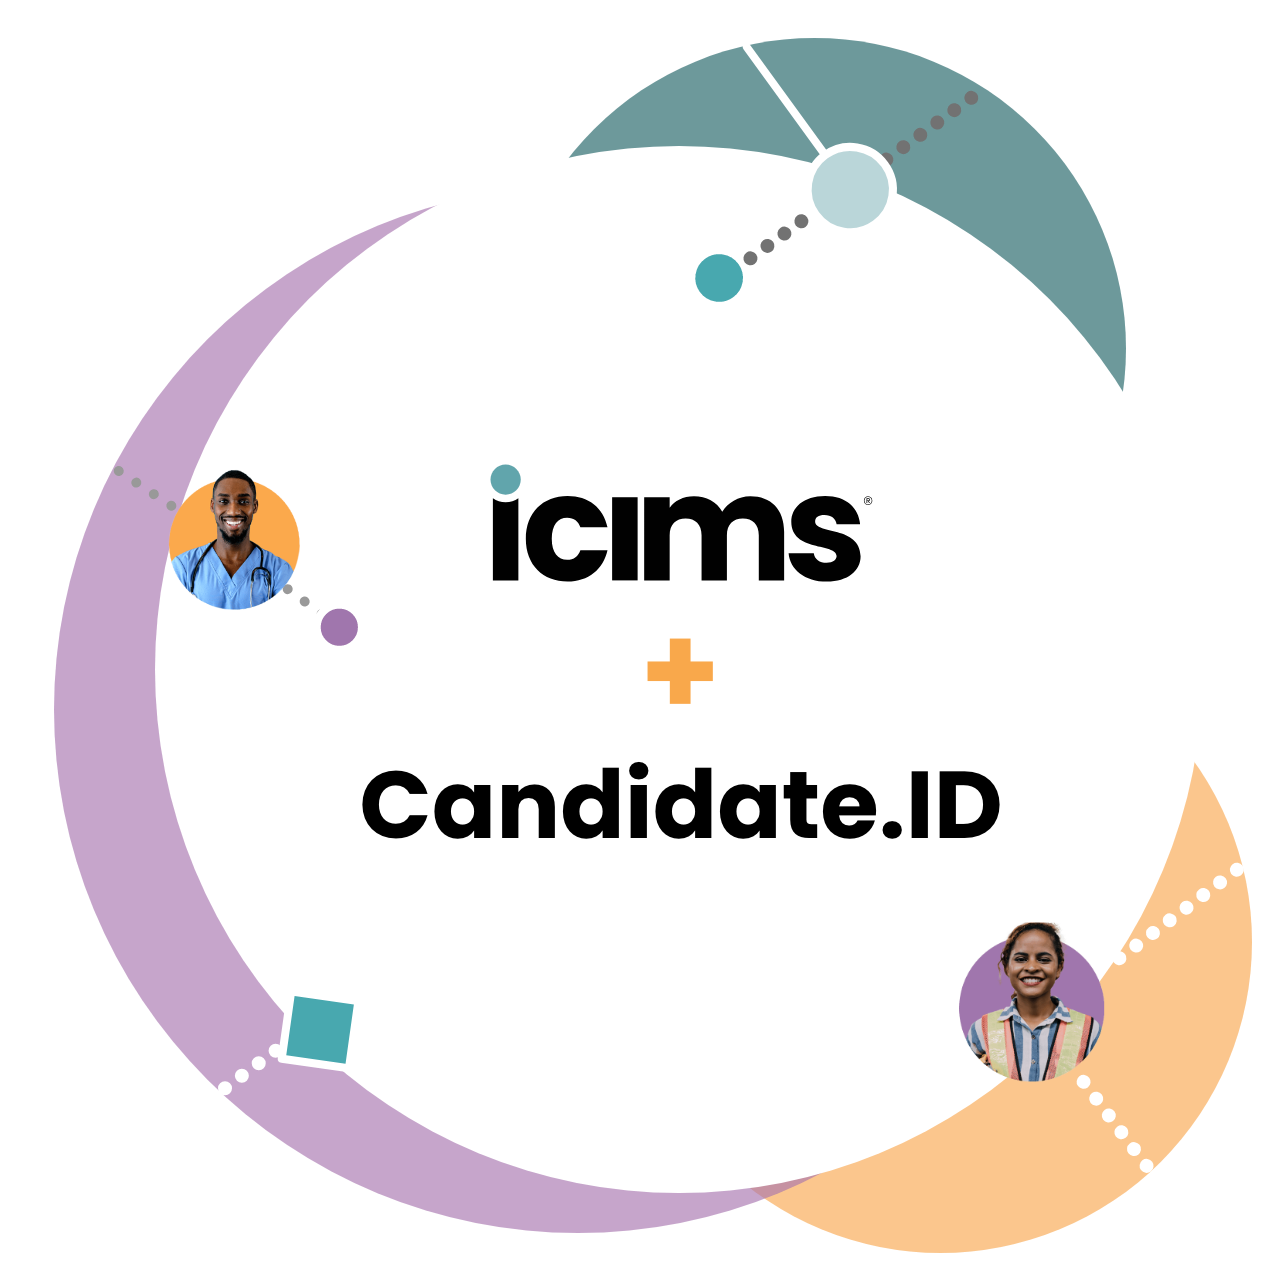 iCIMS + Candidate.ID Image